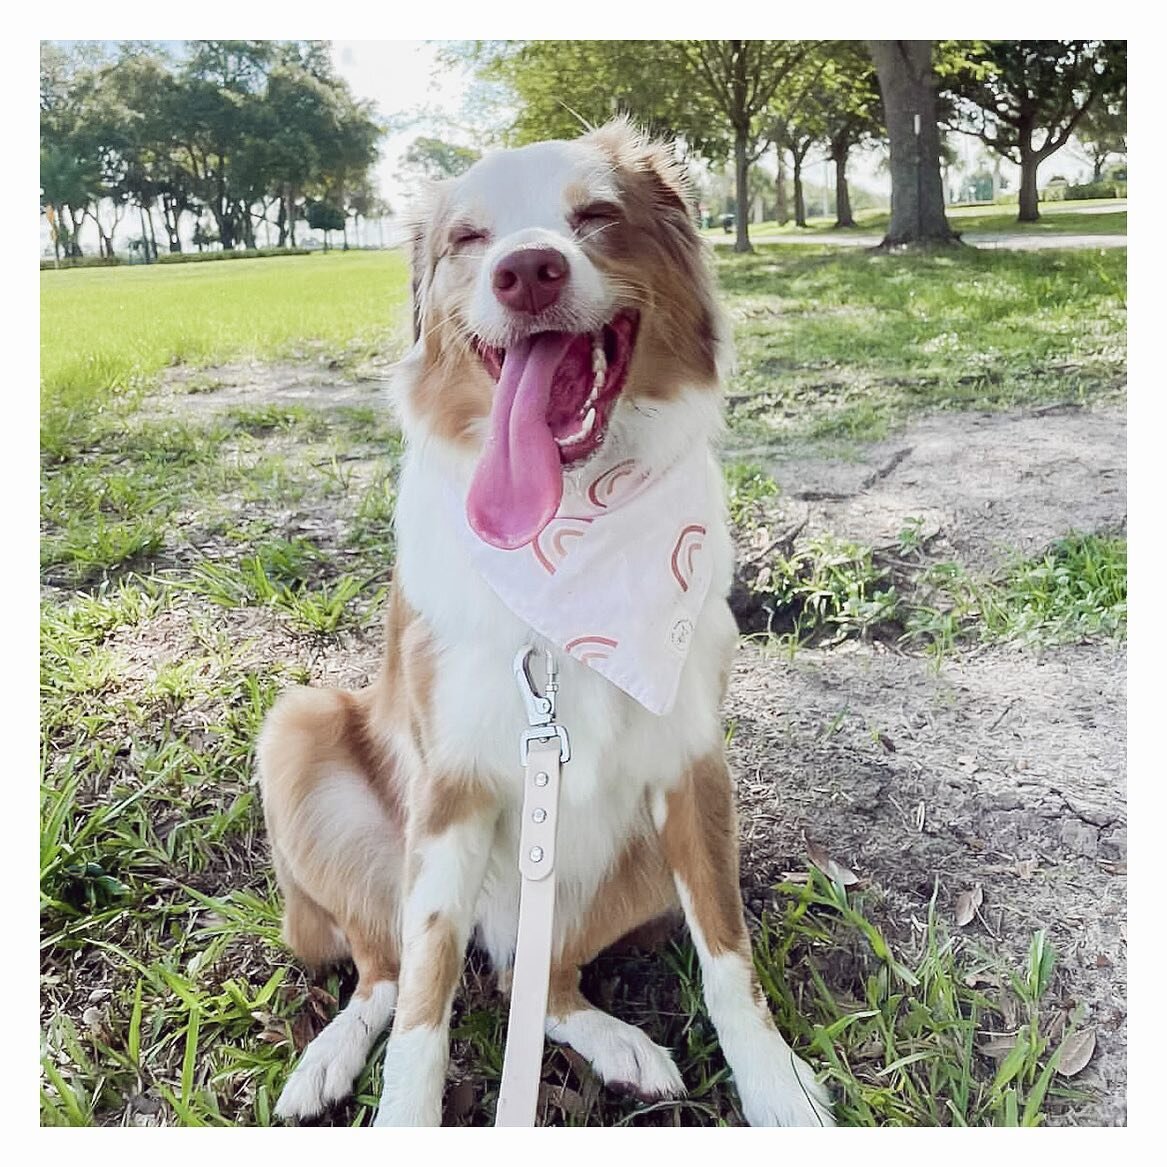 hope your Monday is as happy as Mochi!!

I&rsquo;m thinking of doing a sale to clear through some of our spring styles! Gotta make space for summer and Fall! 😋

Would you want to see a % off or a buy one get one deal? Let us know below! 💕